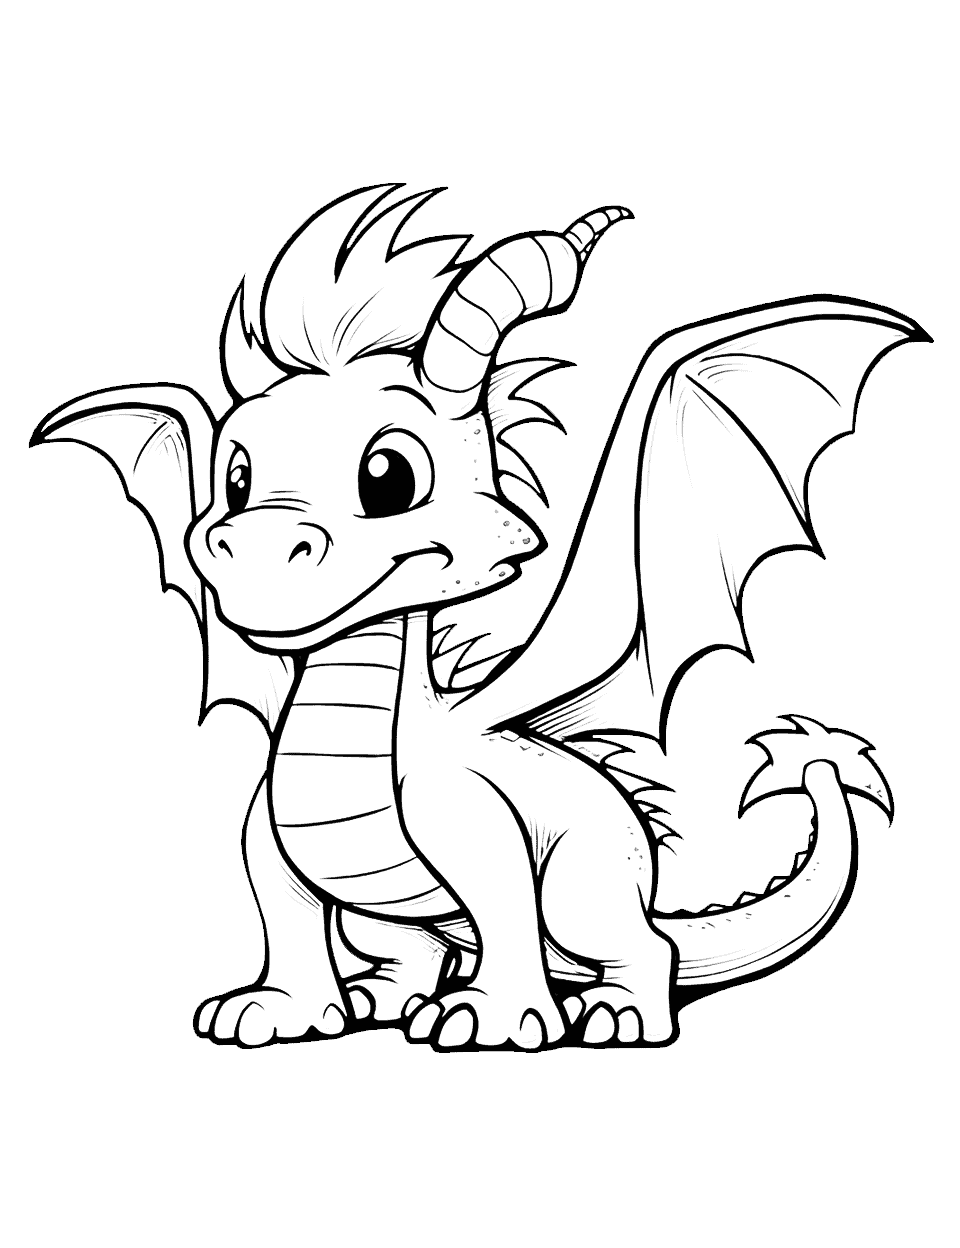 Easy Dragon Coloring Page - A simple, easy-to-draw dragon, perfect for younger kids.